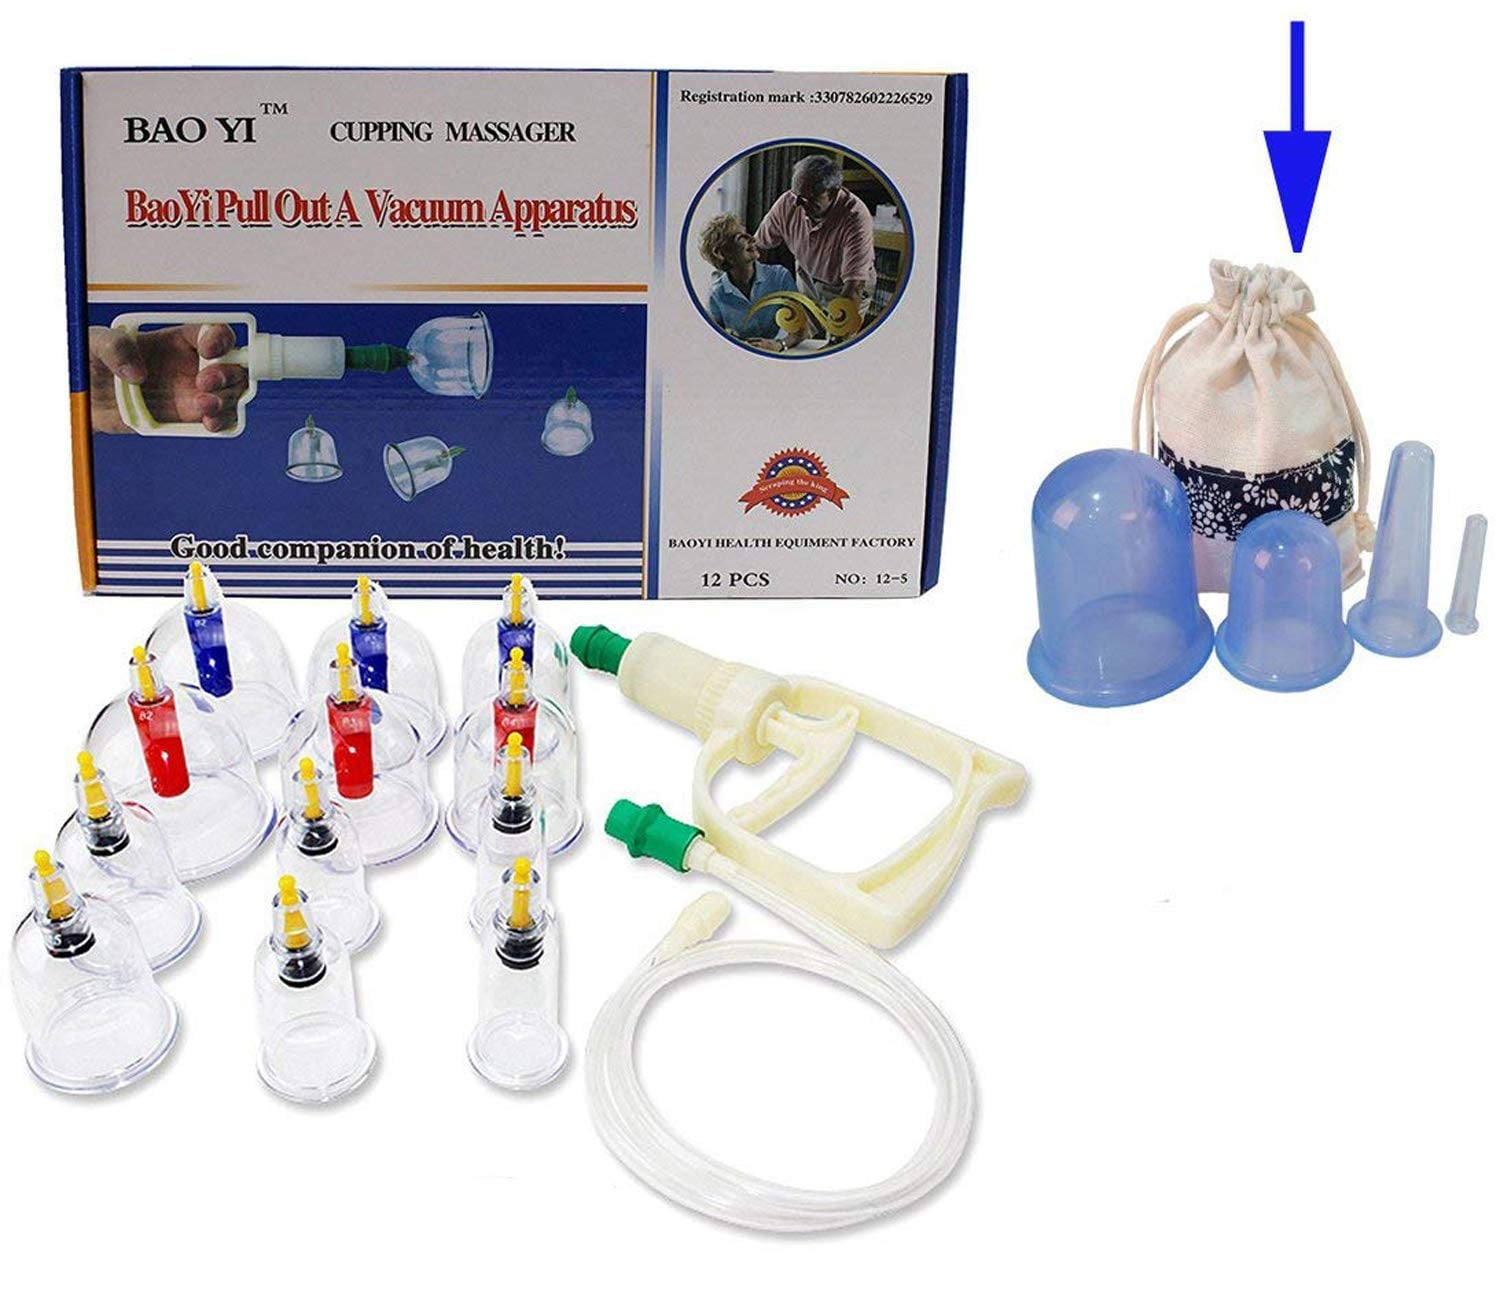 CUPPINGS WITH HAND VACUUM PUMP AND RELEASE VALVES FOR BETTER HEALTH 12 PC. 